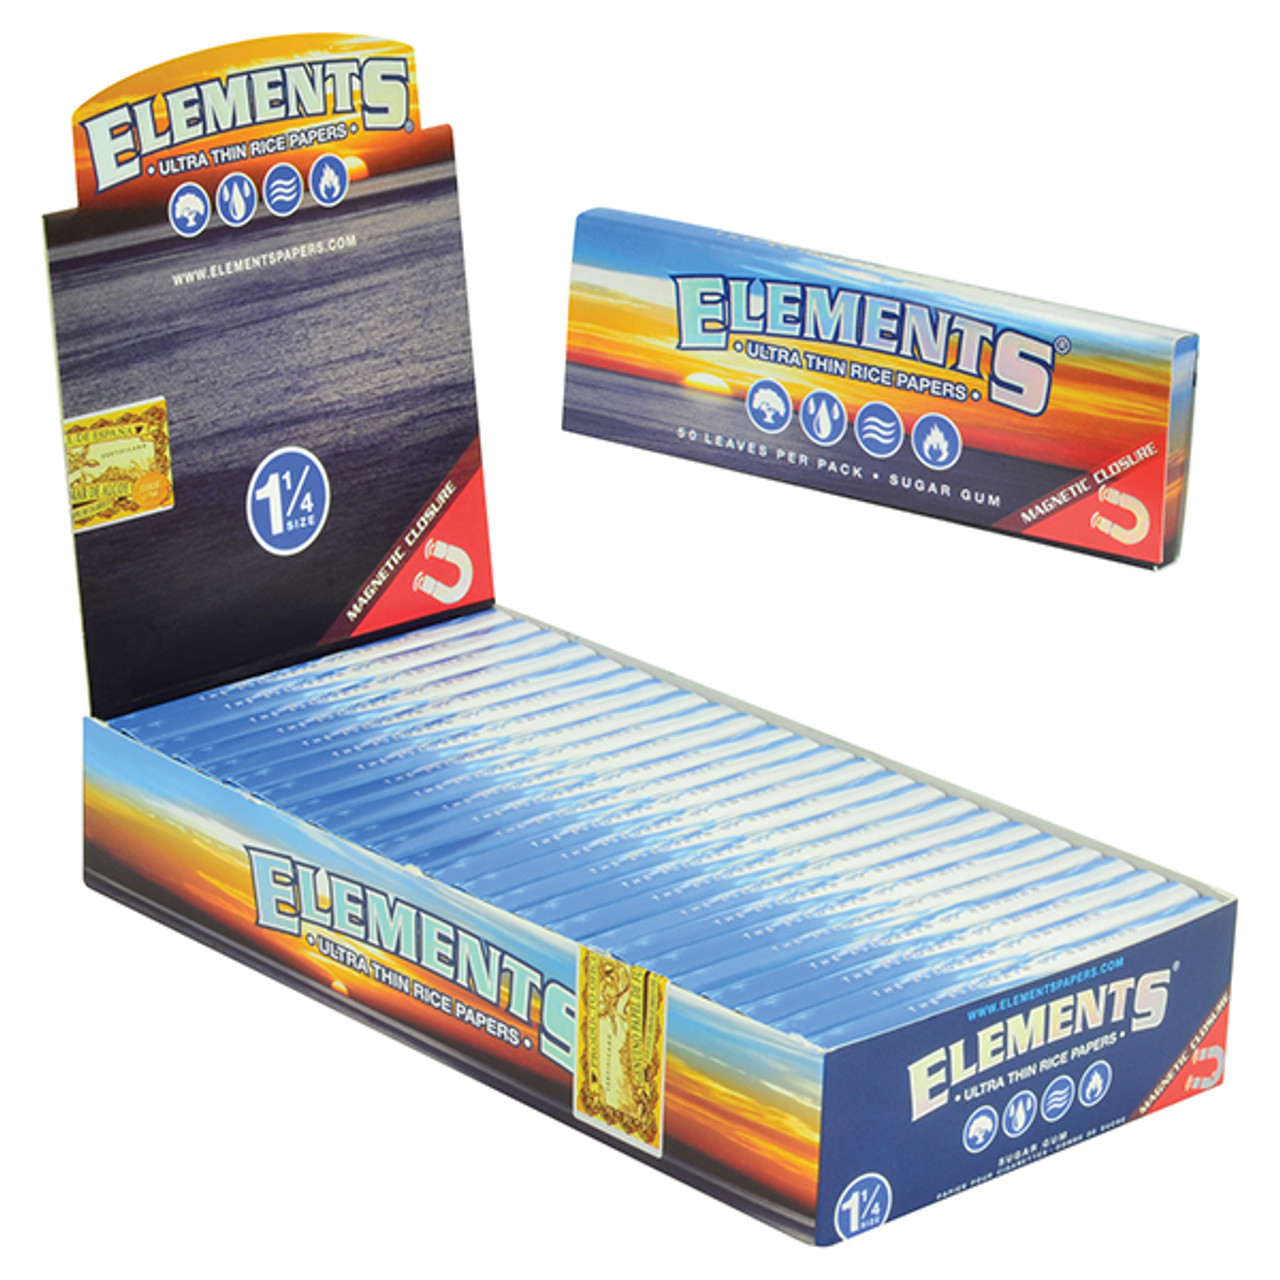 Elements Rolling Papers - 1 1/4 - Burn & Brew